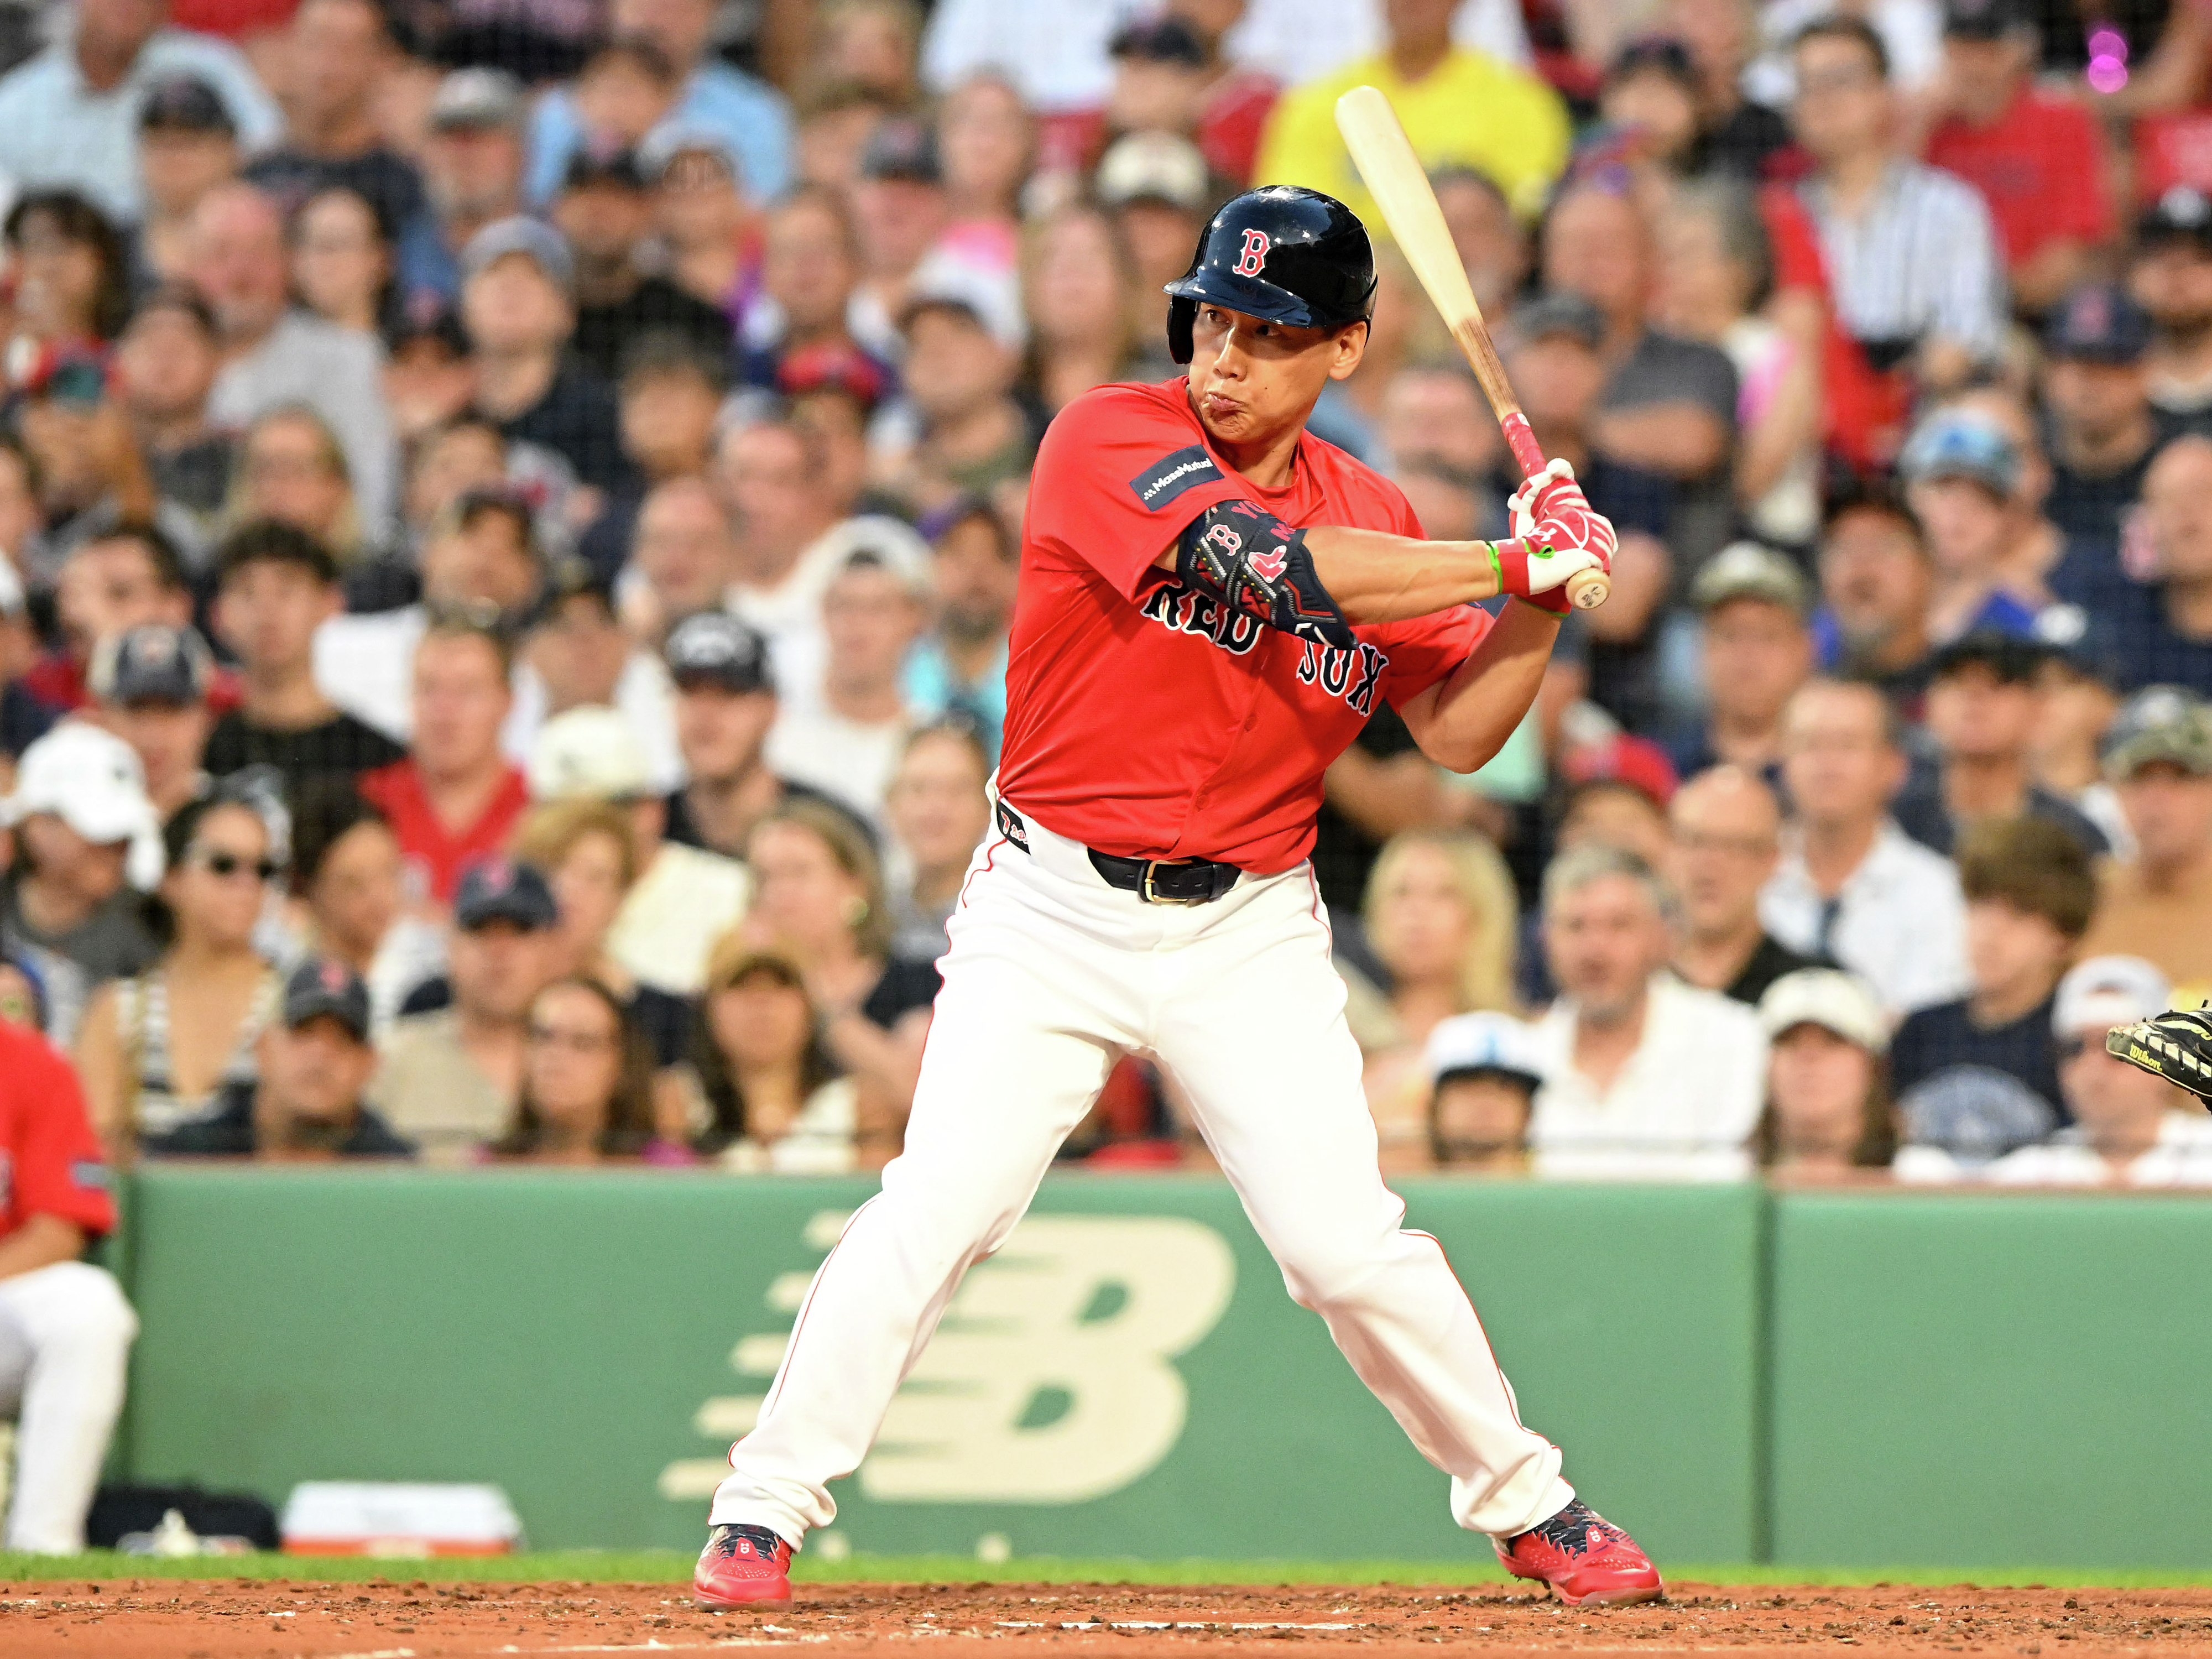 Yoshida hits a 2 run single to give the Red Sox the lead!